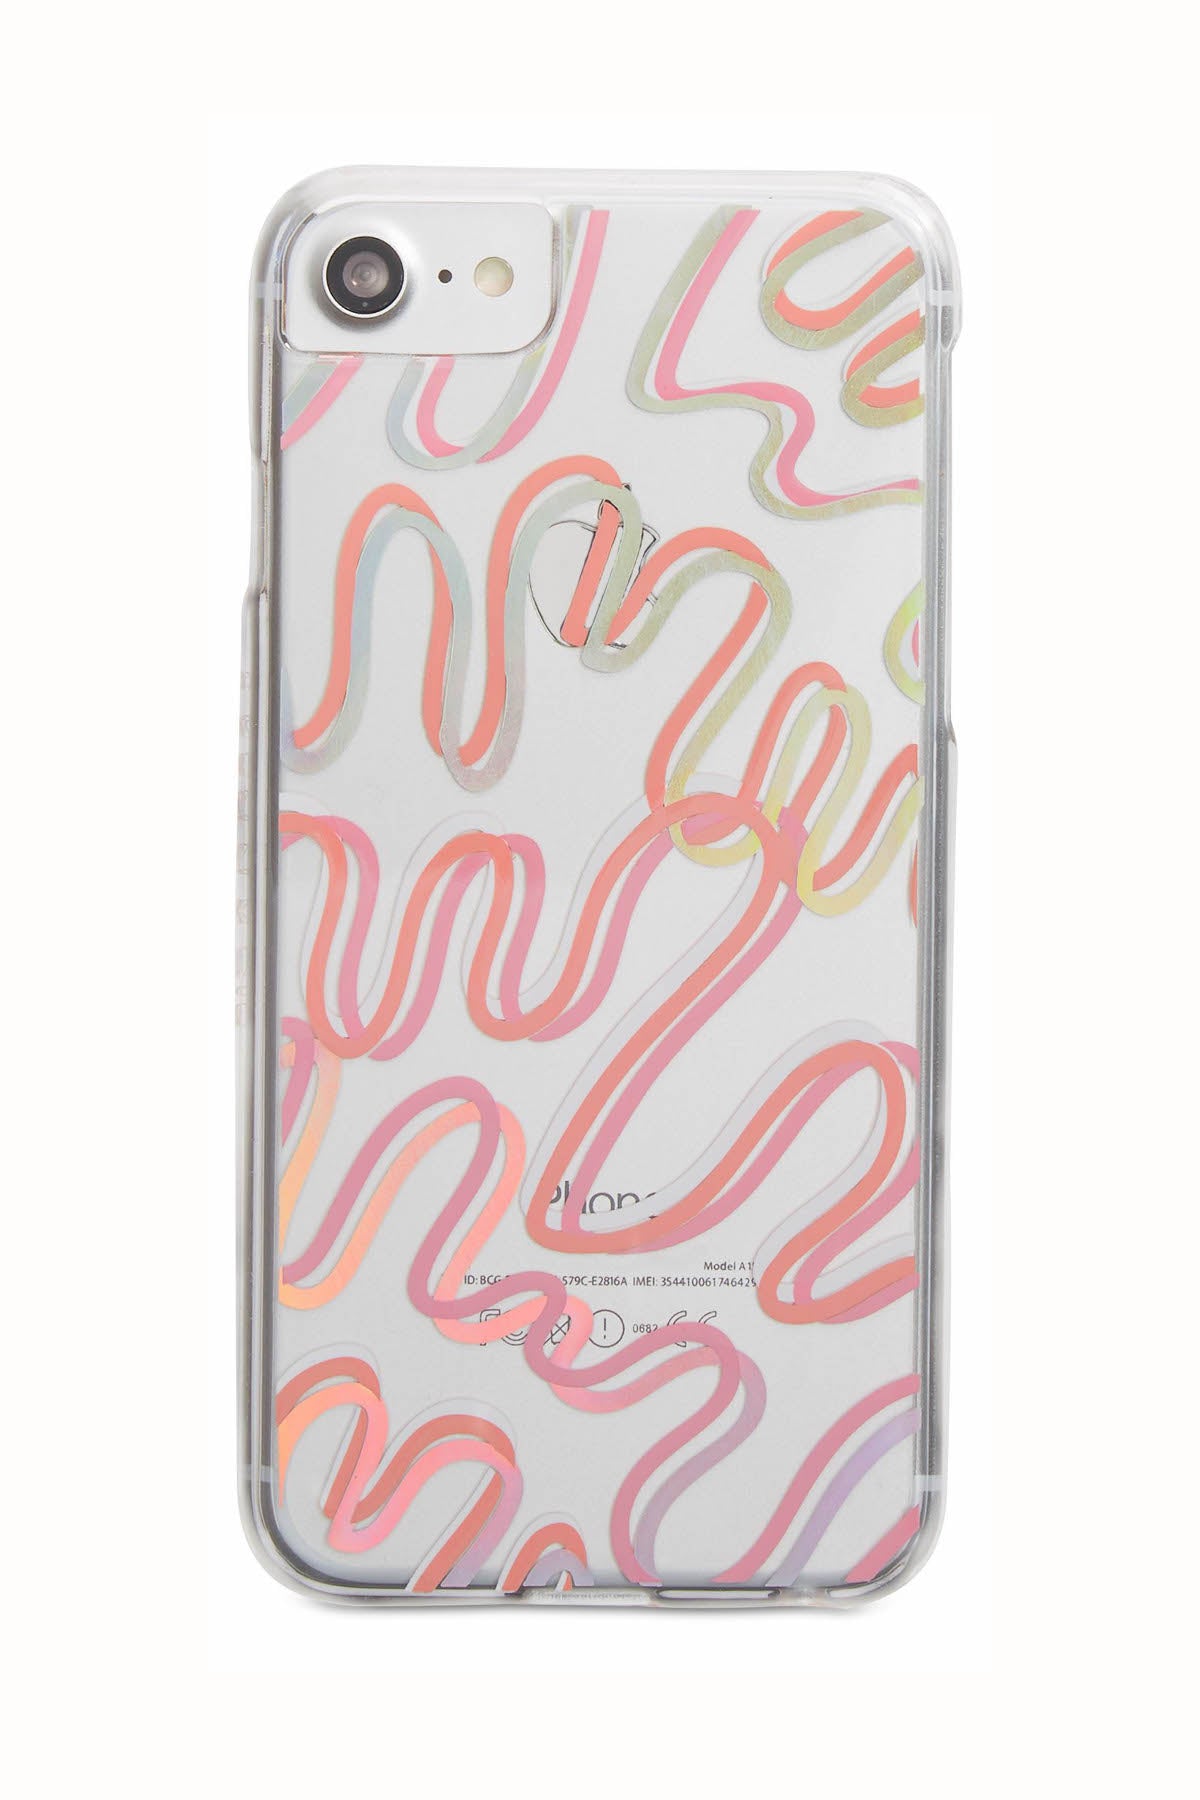 Skinnydip London Pink Wibble iPhone Case & Screen Protector